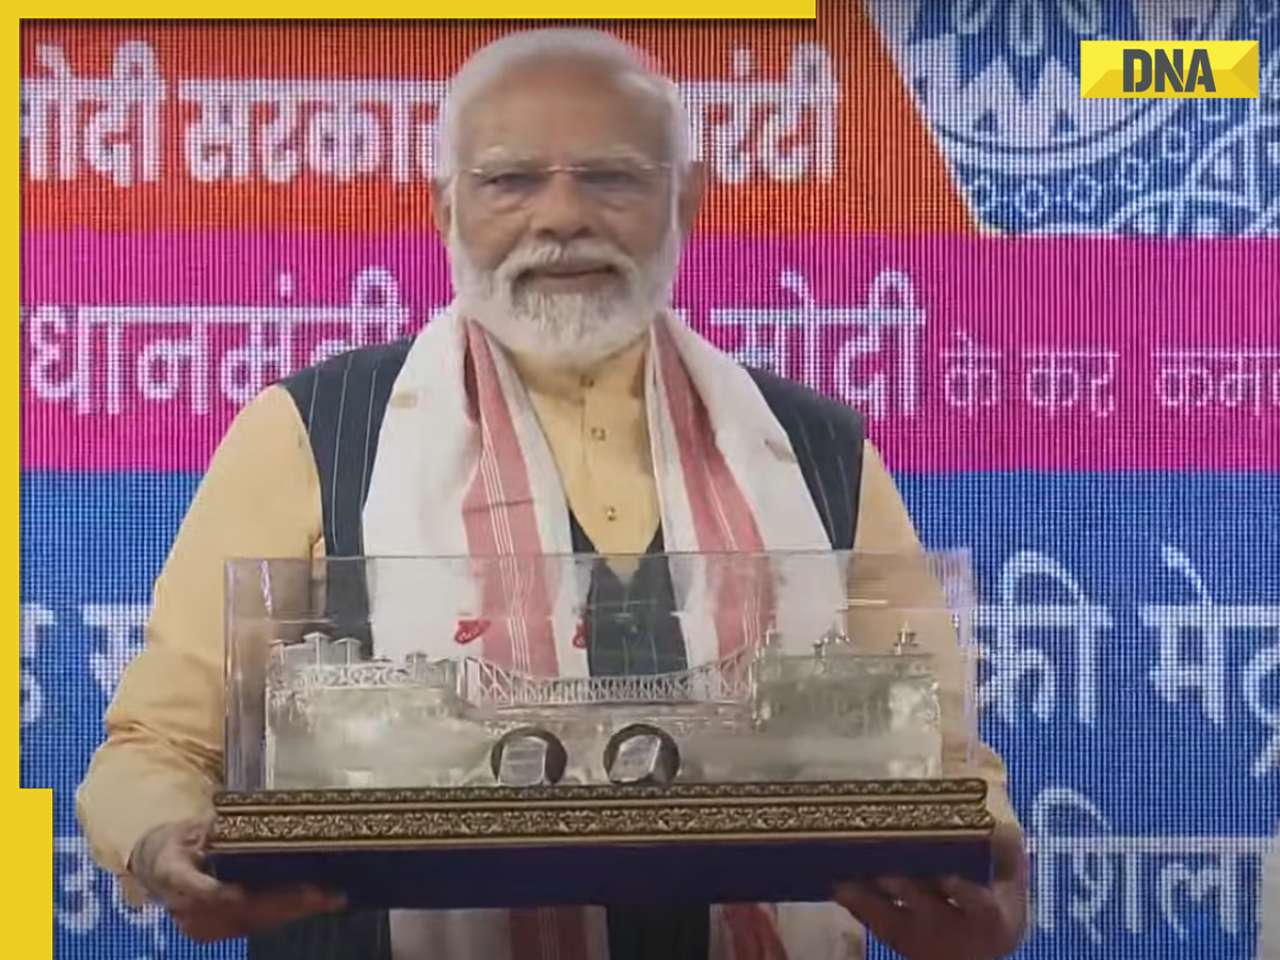 PM Modi unveils India's first underwater metro along with multiple projects worth Rs 15400 crore in Kolkata